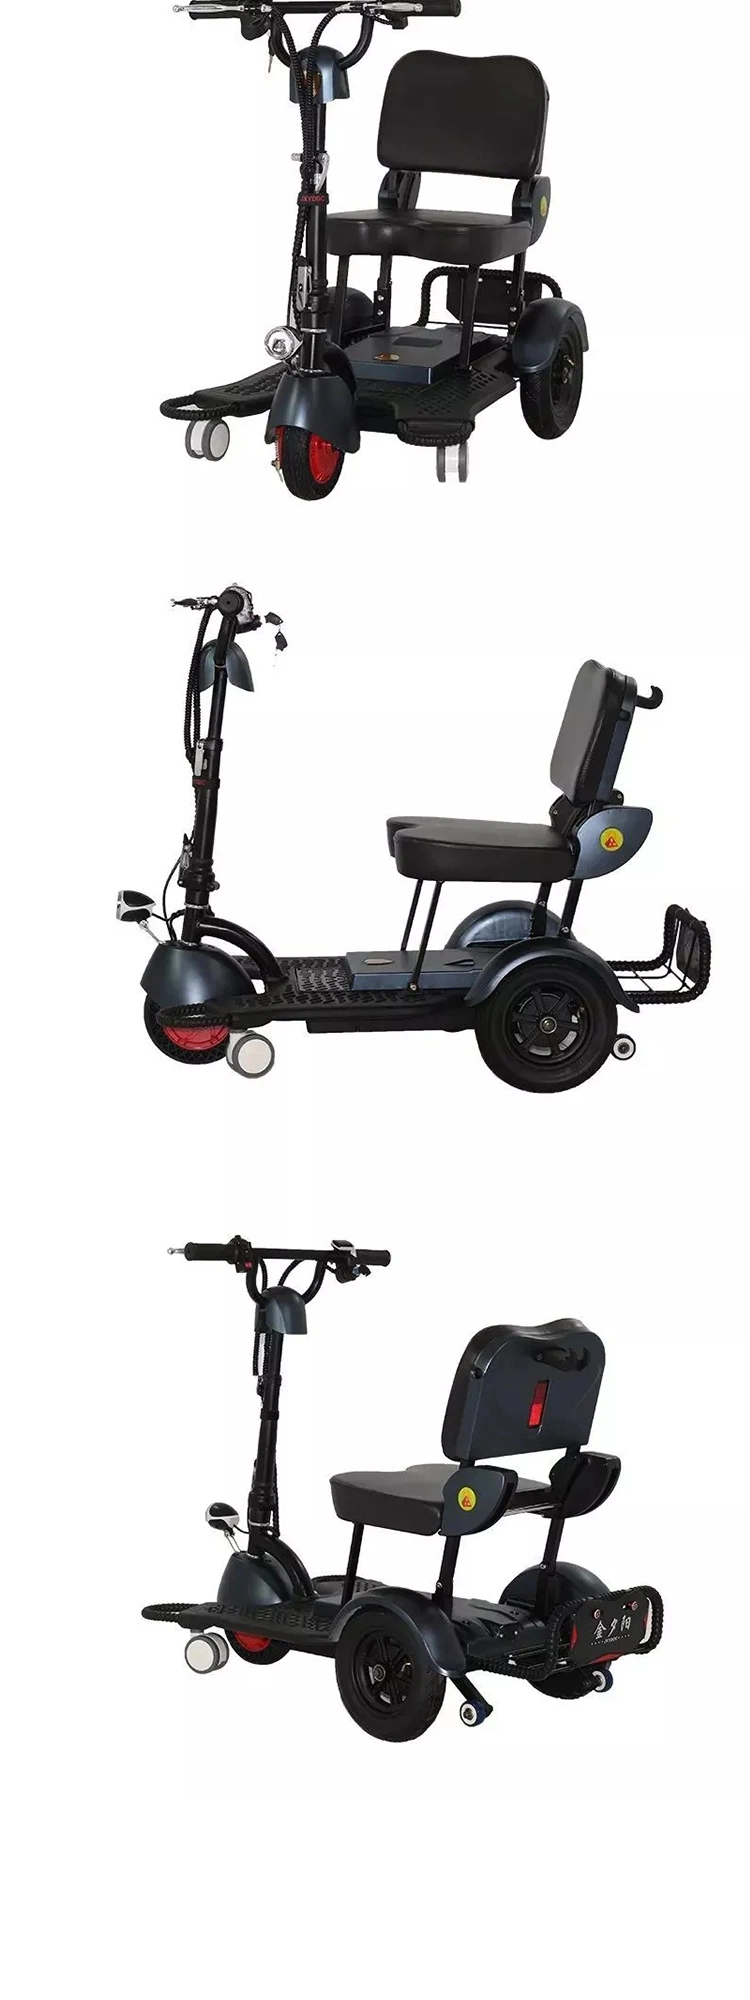 Folding Elderly Disabled E Scooter China Factory 48V 12ah Foldable Electric Handicapped Mobility Scooter